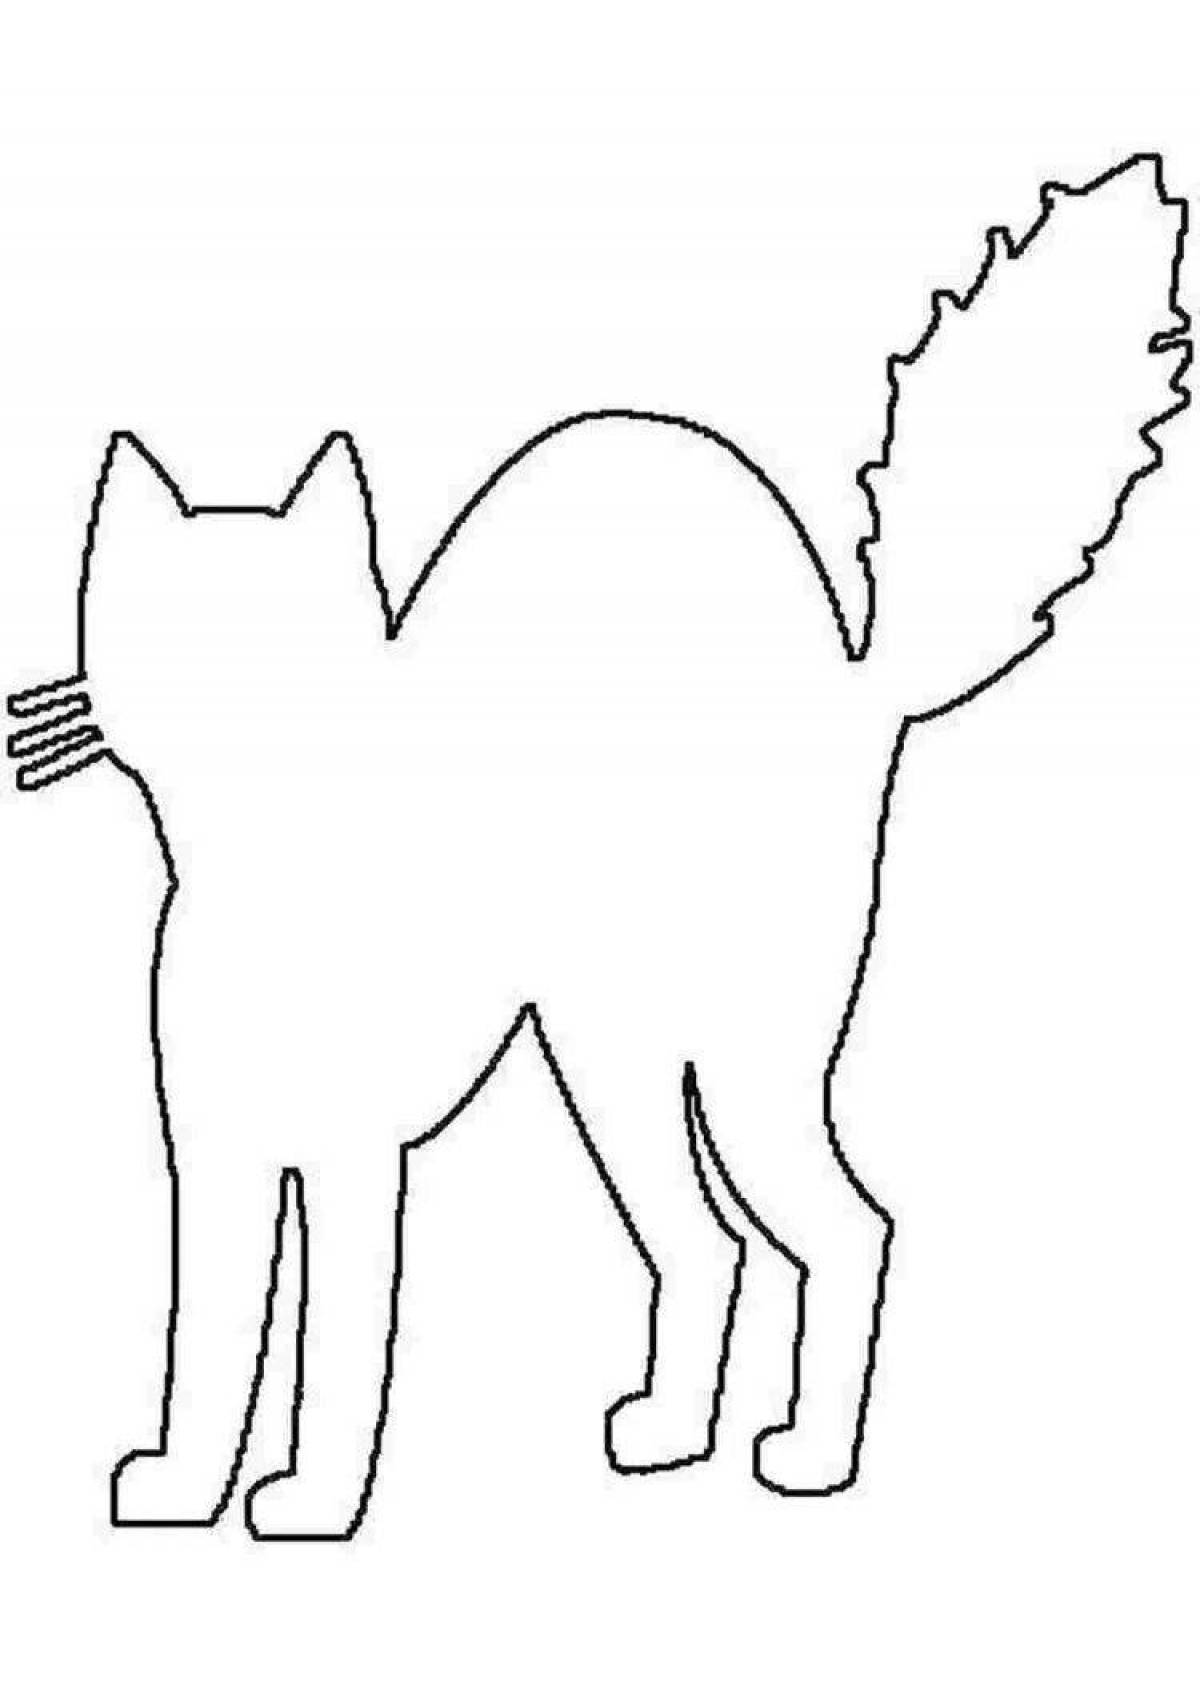 Coloring page elegant cat silhouette